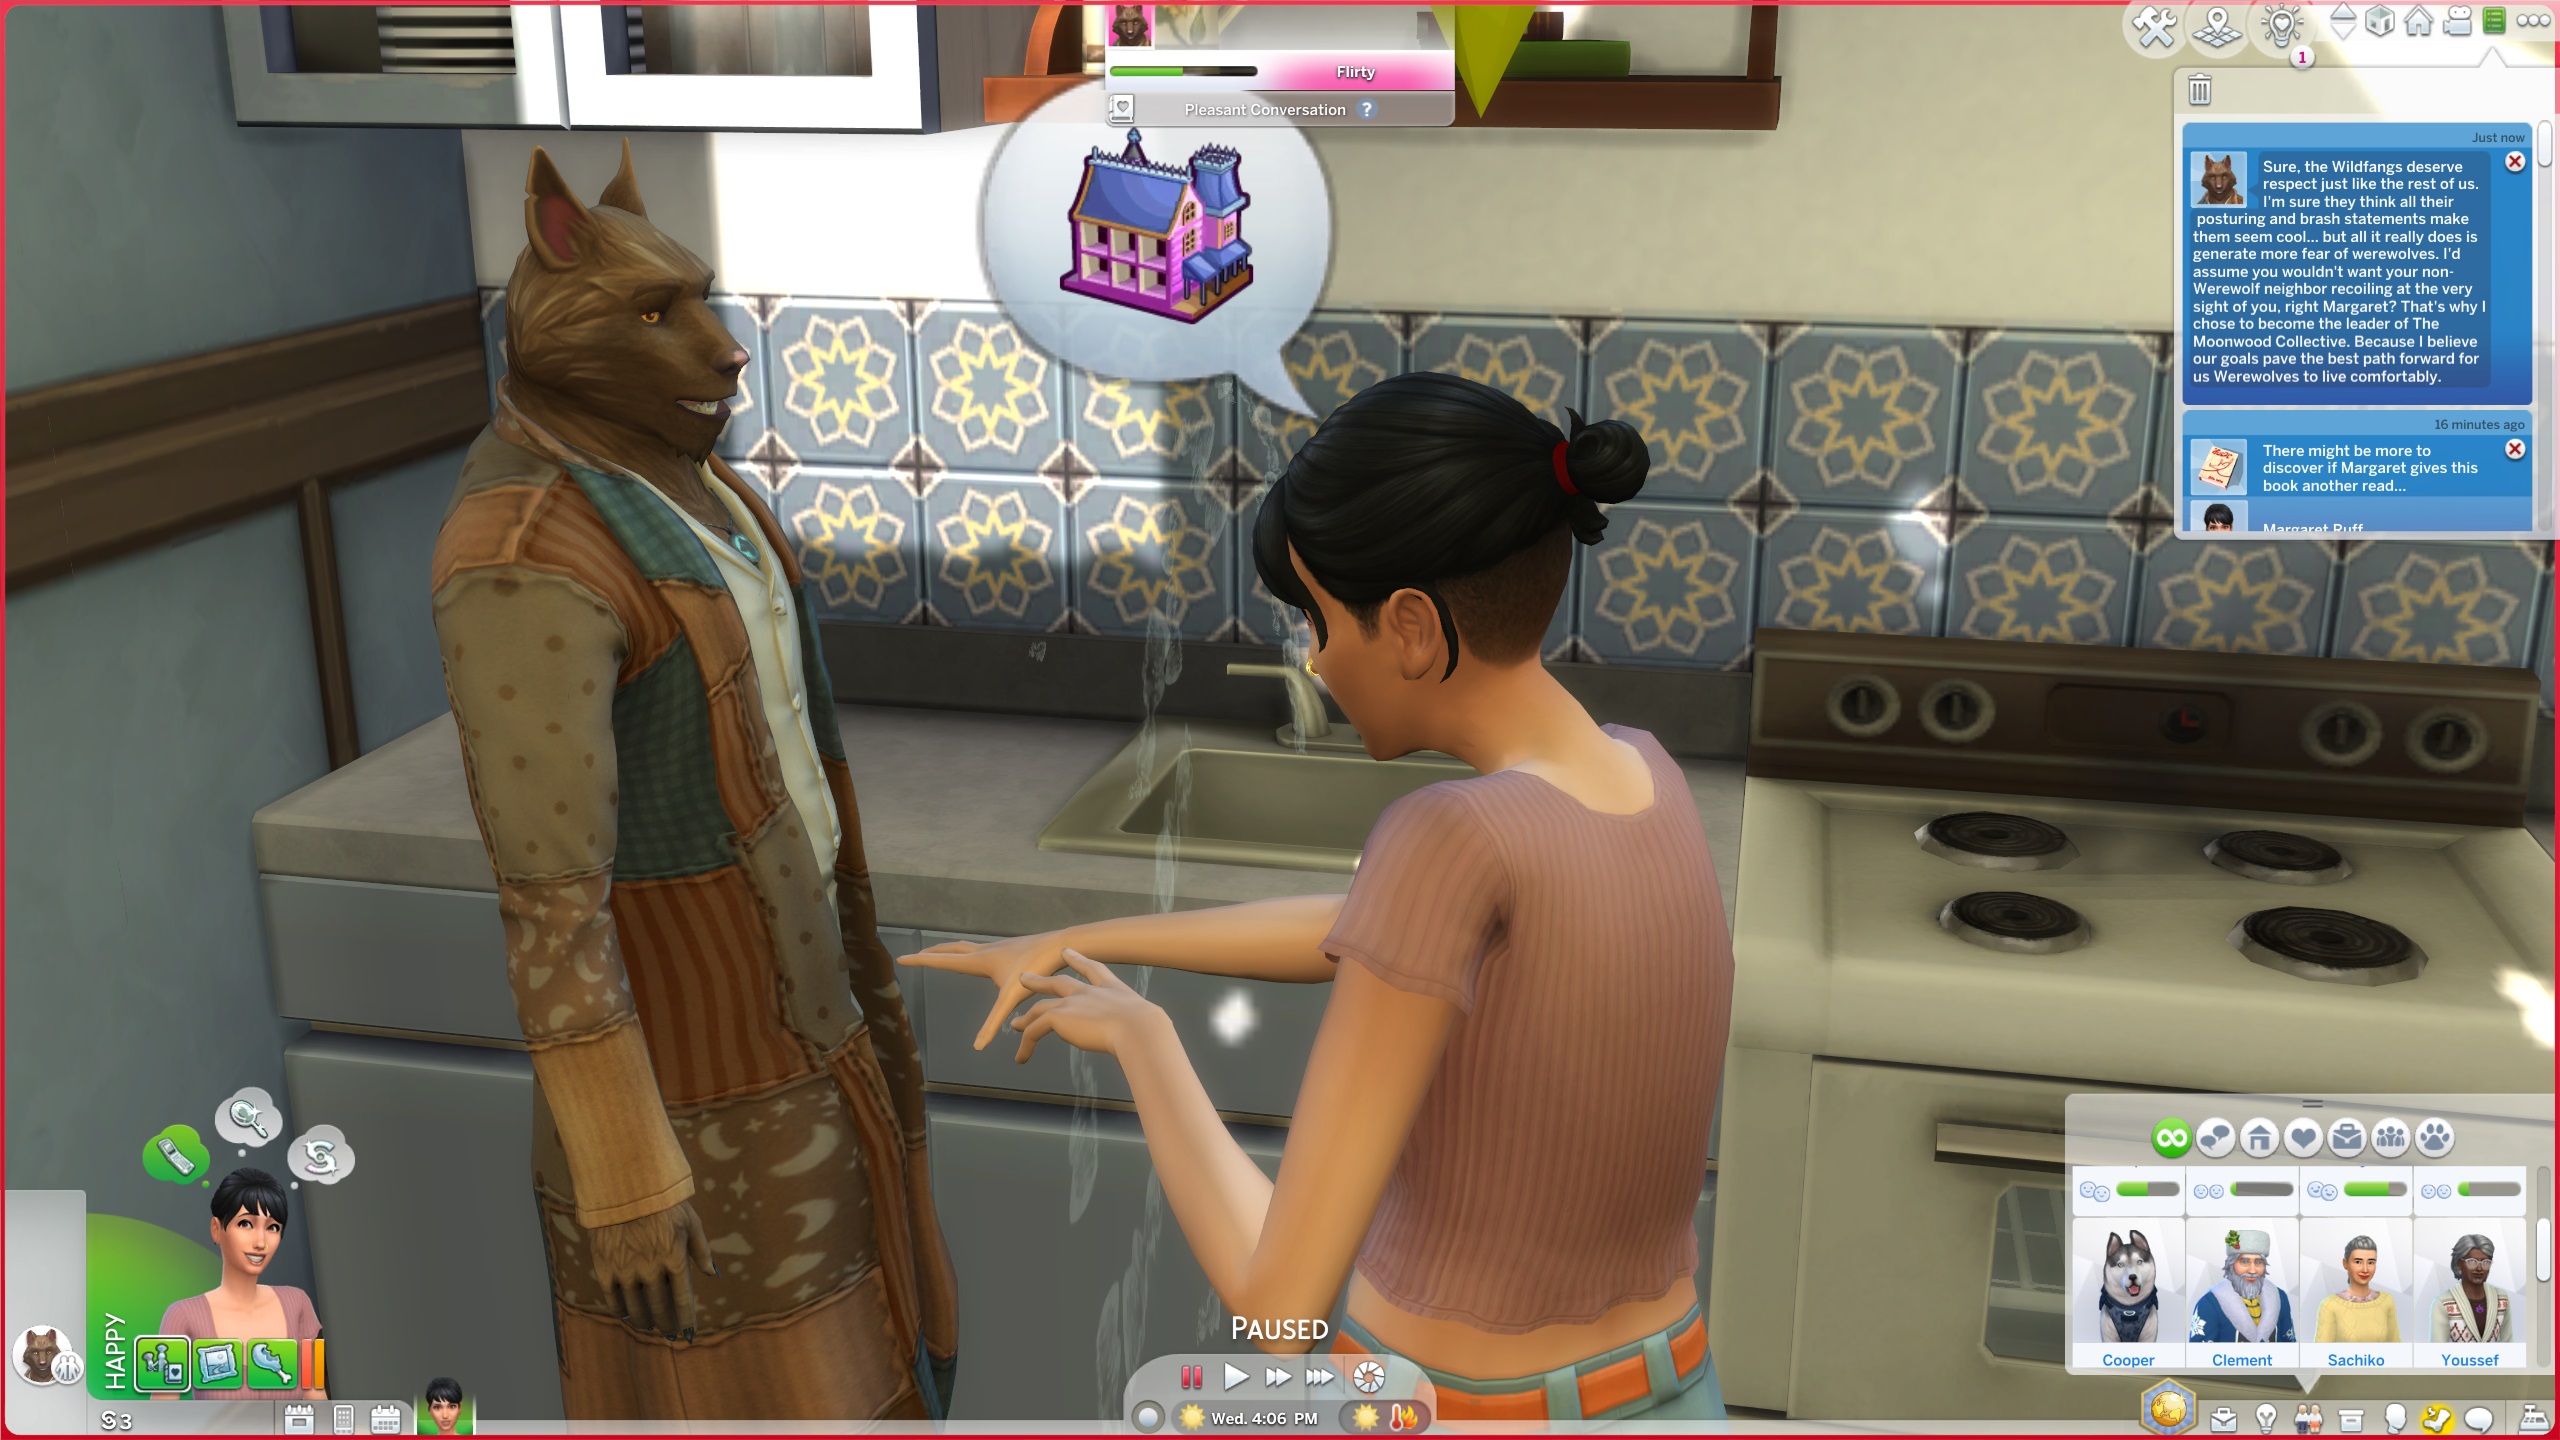 The Sims 4 Werewolves - A Sim talking with Kristopher the werewolf in a kitchen.